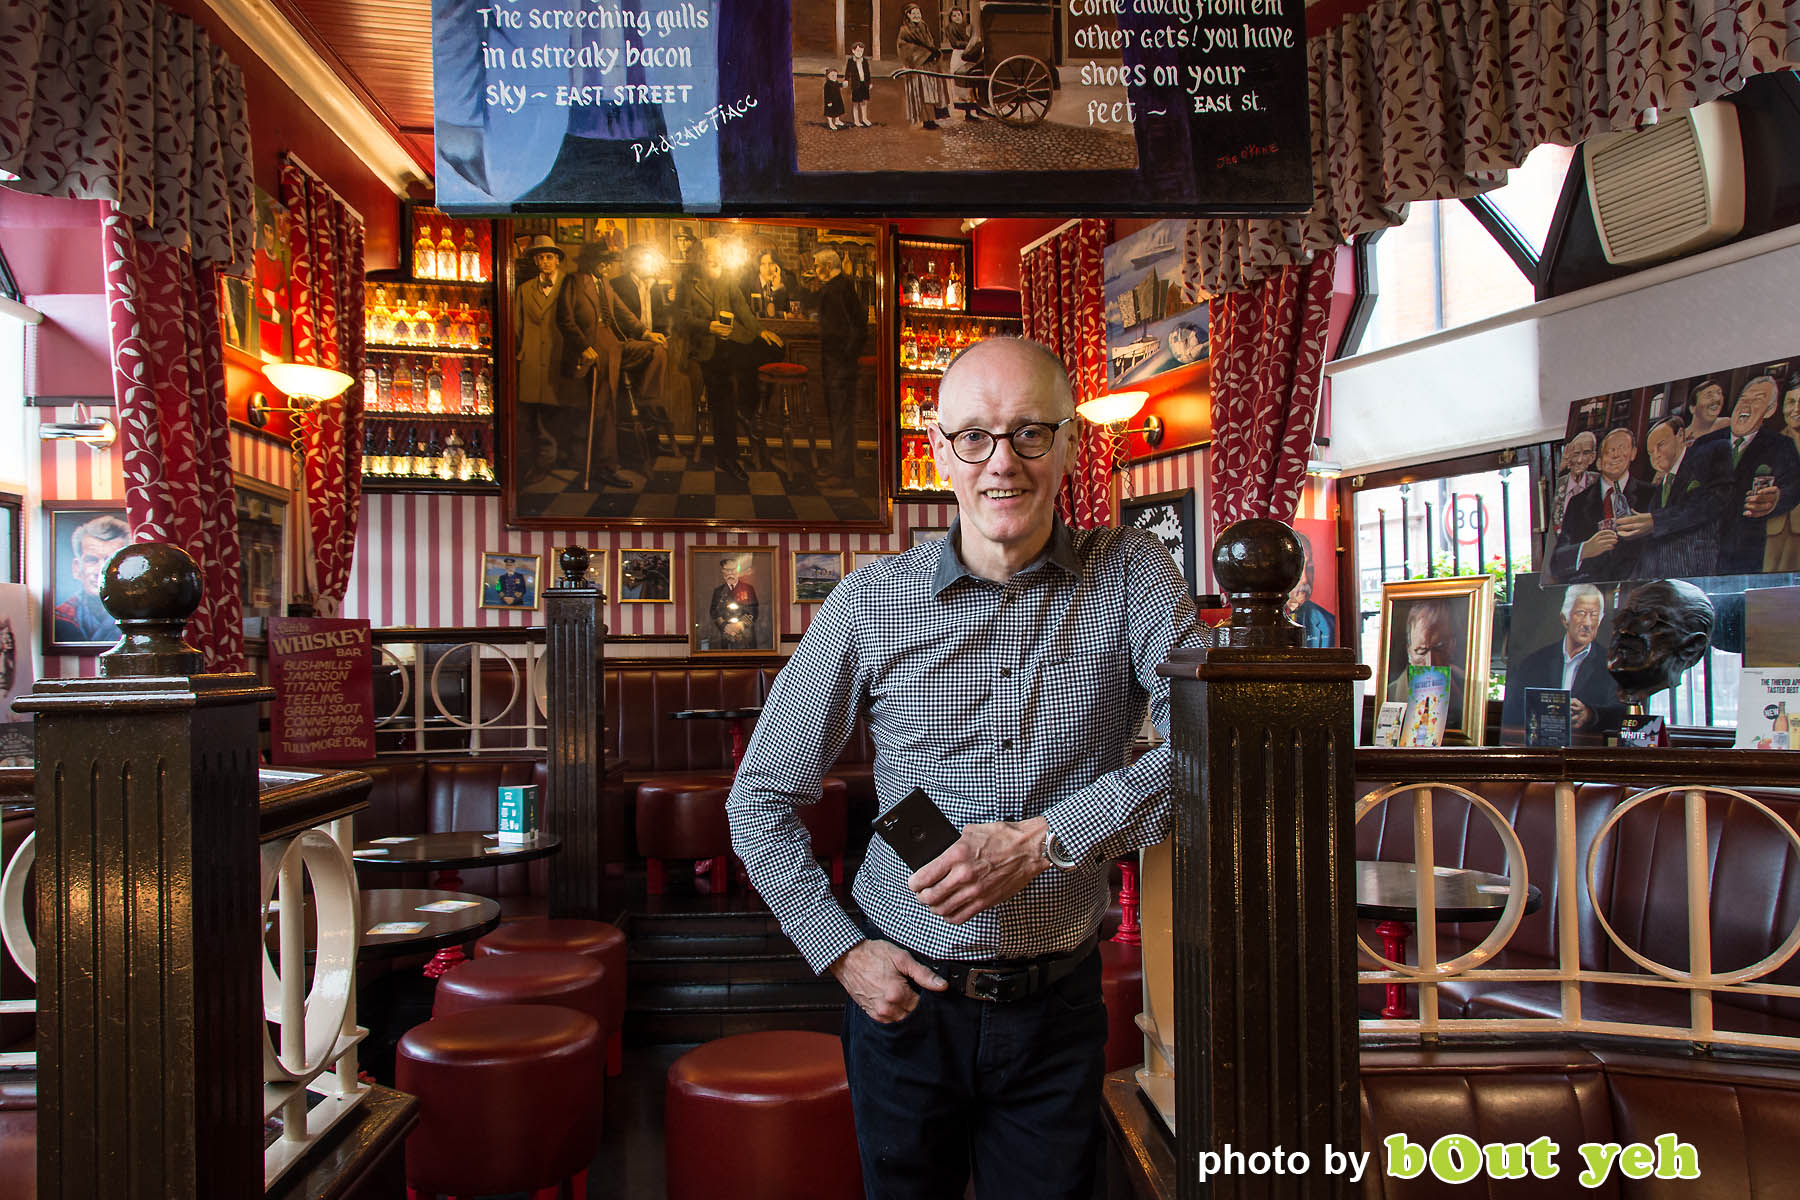 John Bittles, Bittles Bar, by Bout Yeh photographers Belfast - photo 5016. Editorial feature about John Bittles, owner of Bittles Bar, Belfast. Northern Ireland